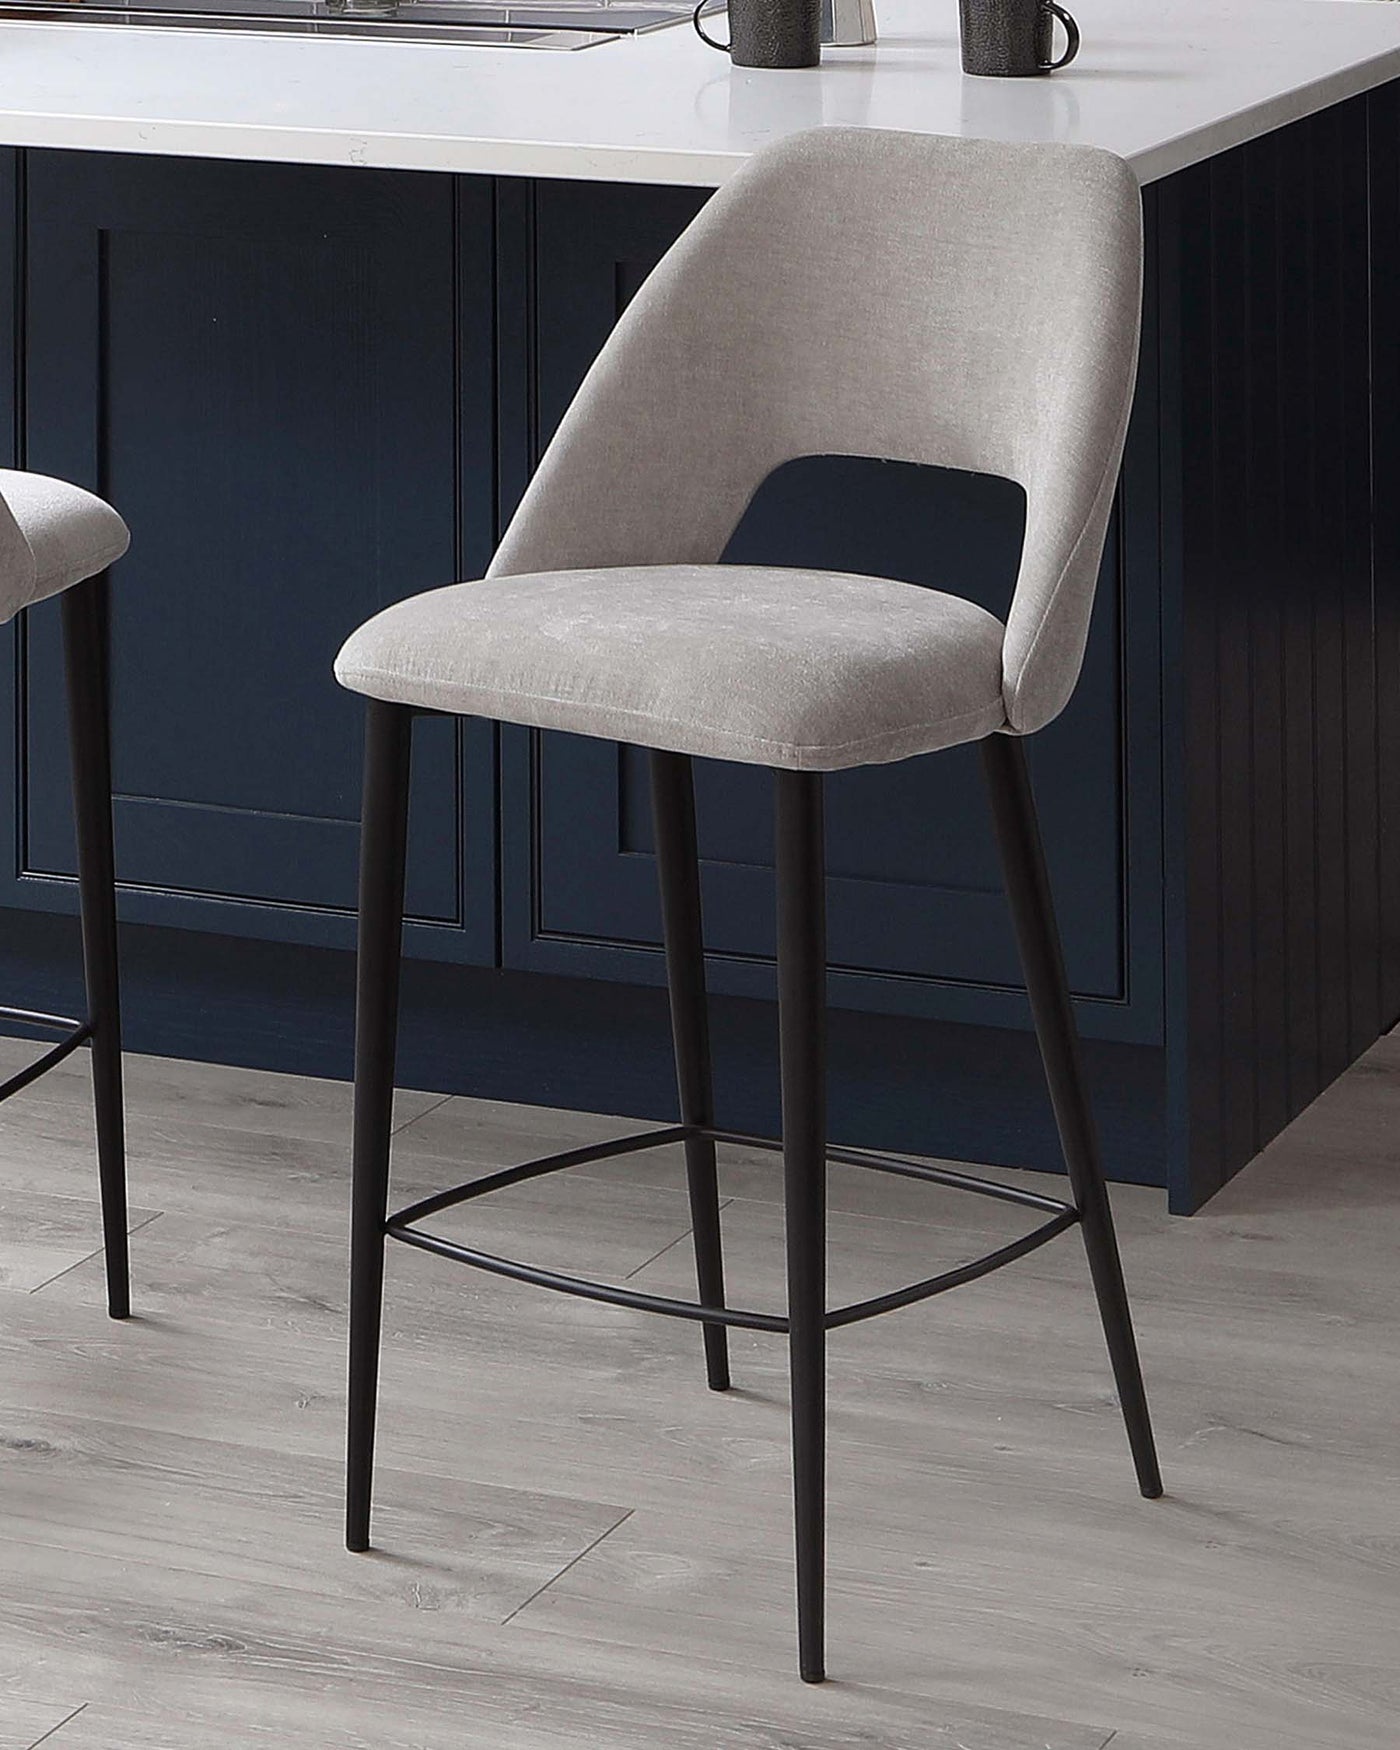 Modern light grey upholstered bar stool with a curved backrest and a cutout detail, mounted on a sleek black metal frame with four legs and footrest. Ideal for contemporary kitchen or bar settings.